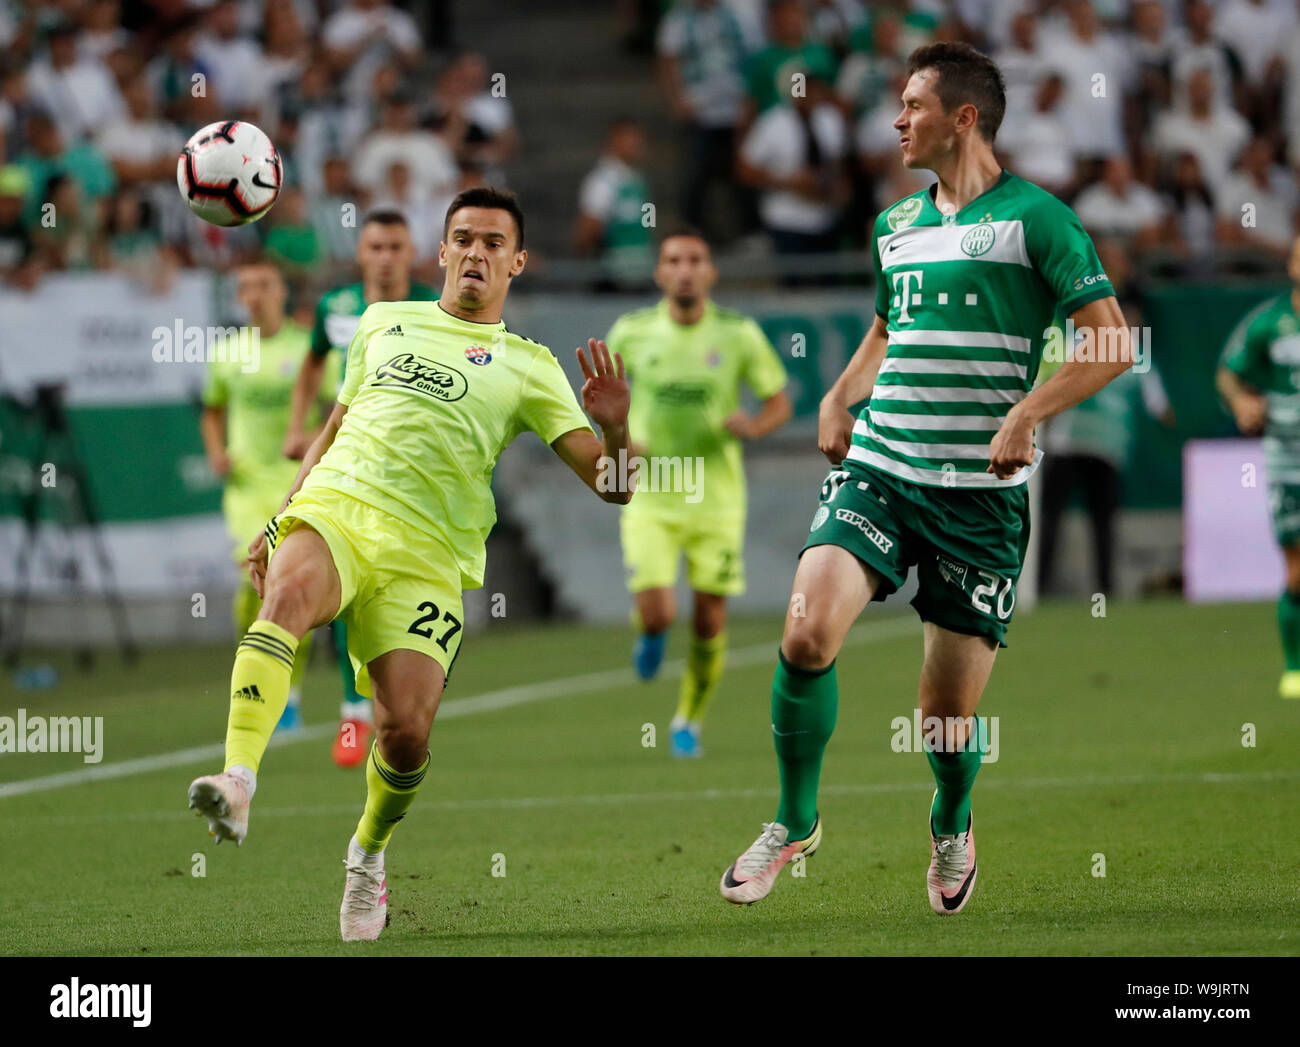 BUDAPEST, HUNGARY - AUGUST 13: (l-r) Tokmac Chol Nguen of Ferencvarosi TC  wins the ball from Arijan Ademi of GNK Dinamo Zagreb during the UEFA  Champions League Third Qualifying Round match between